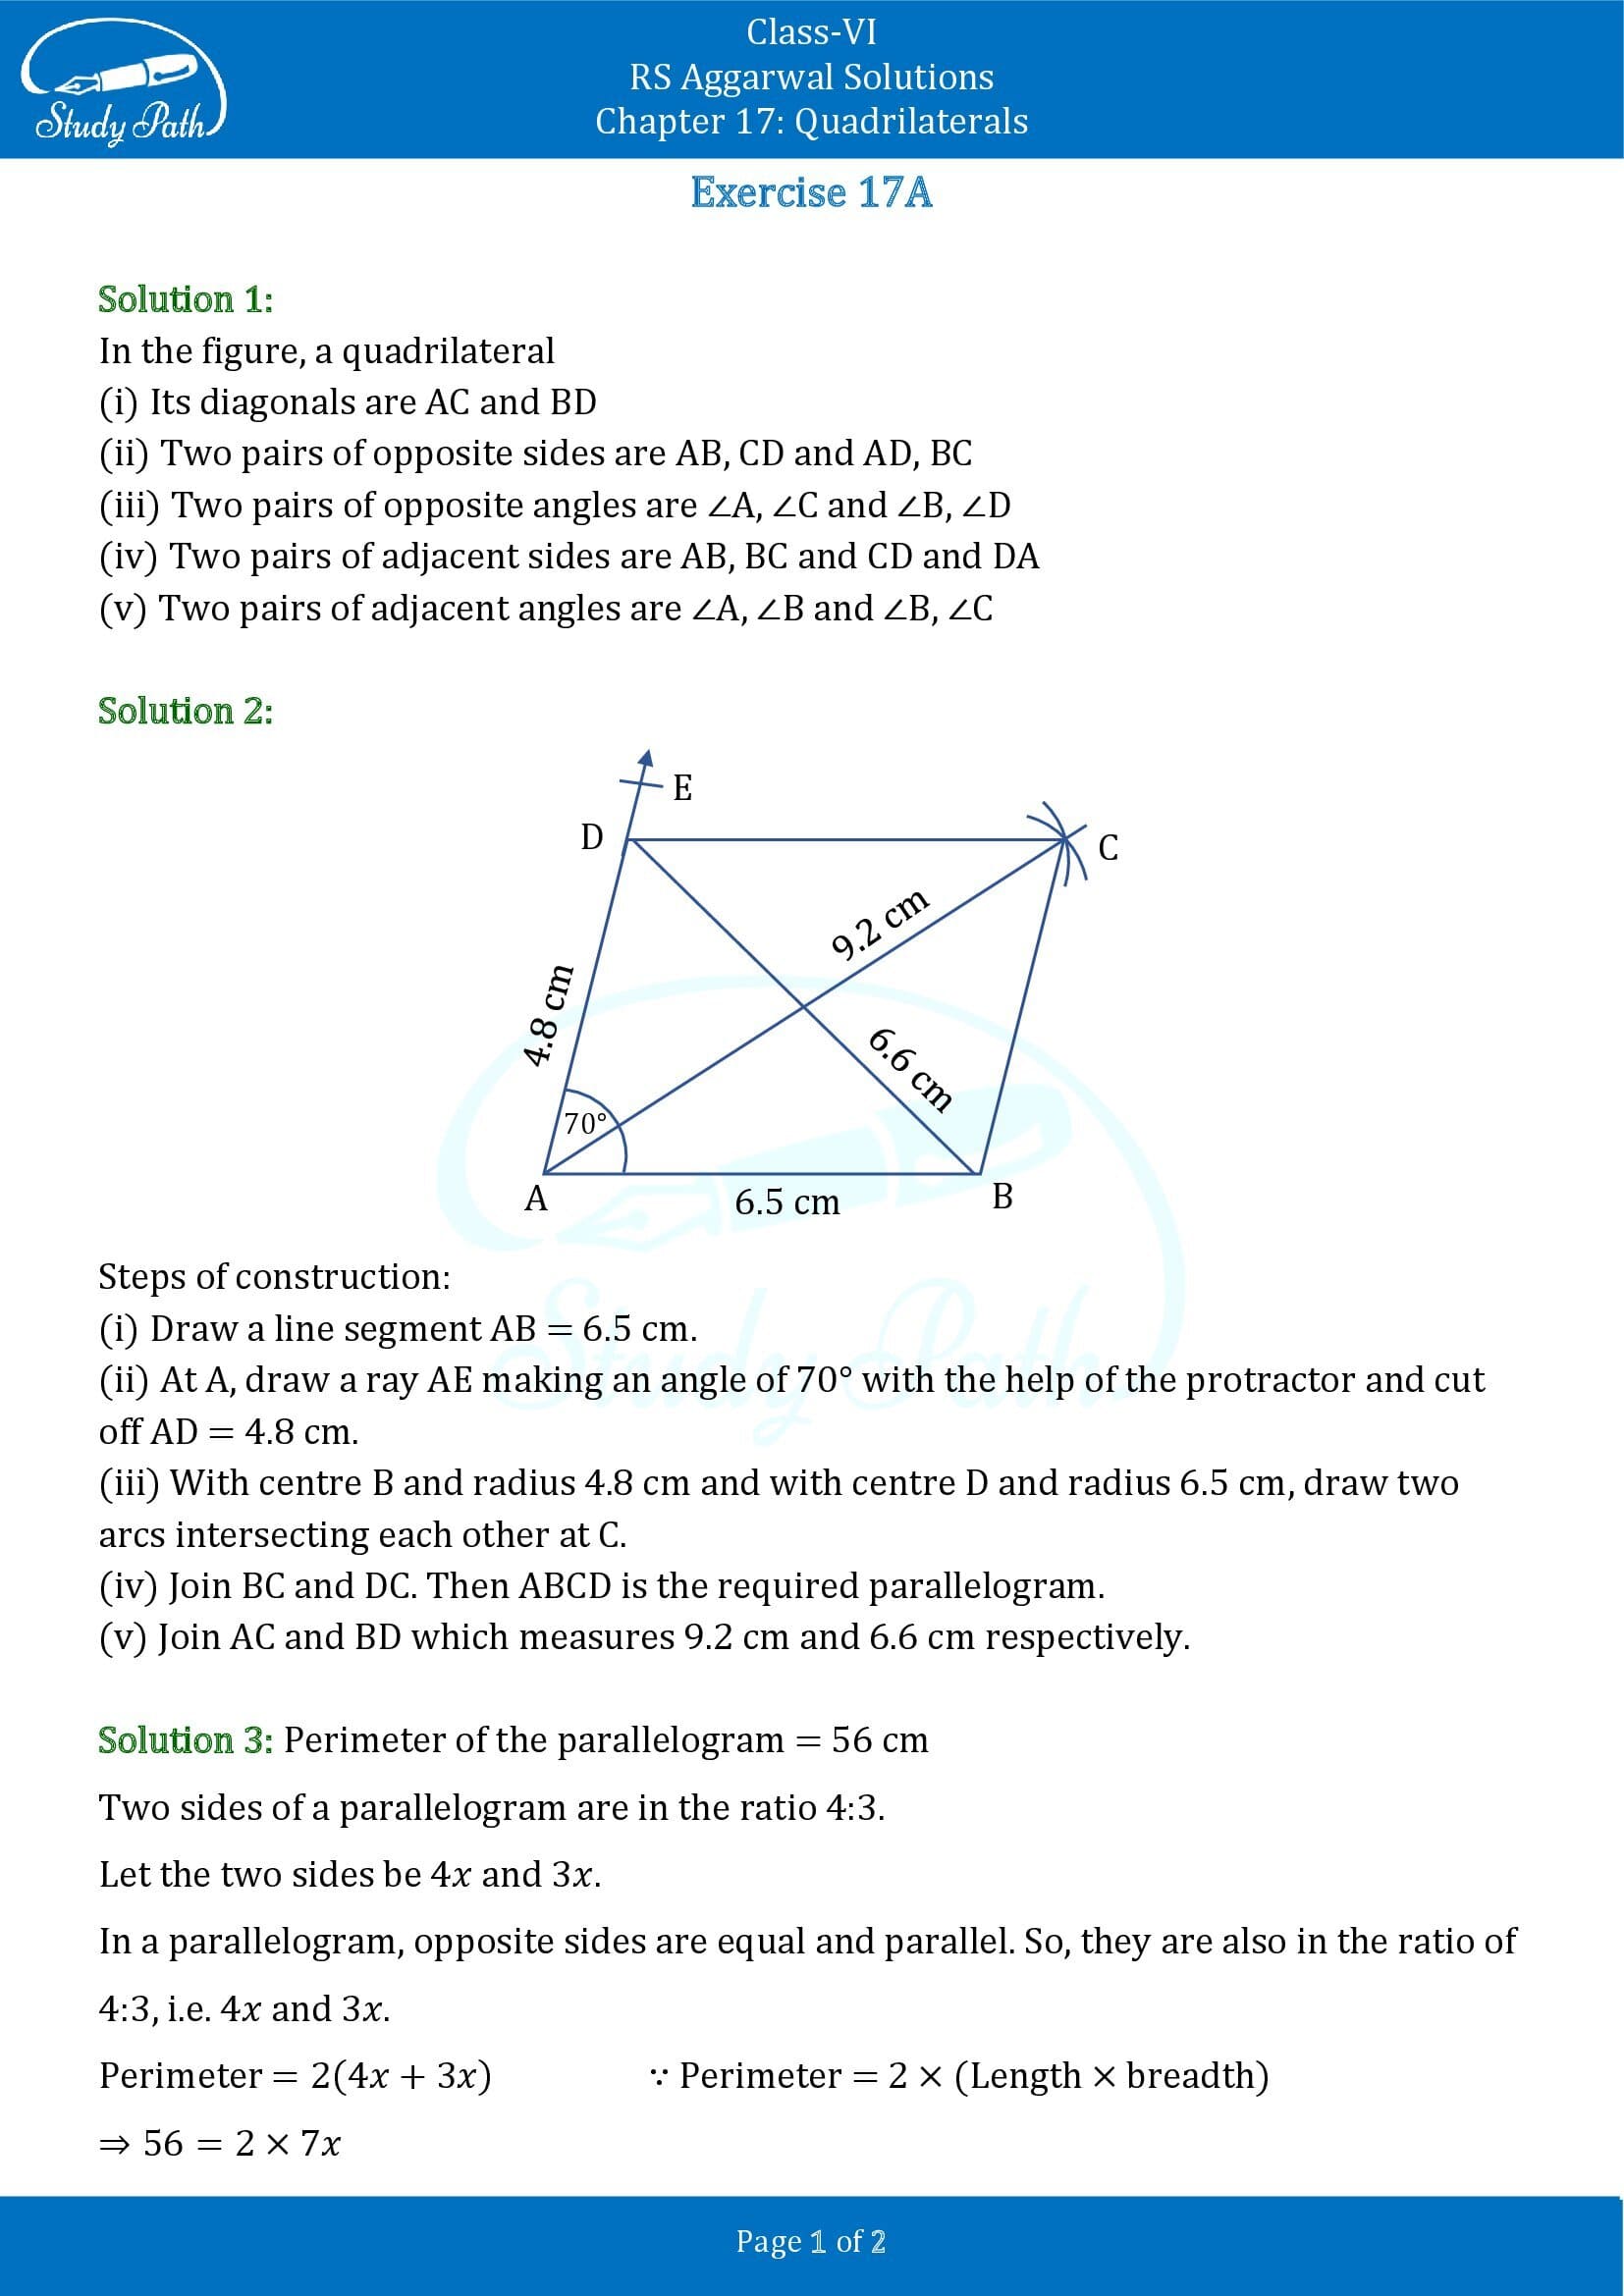 RS Aggarwal Solutions Class 6 Chapter 17 Quadrilaterals Exercise 17A 00001